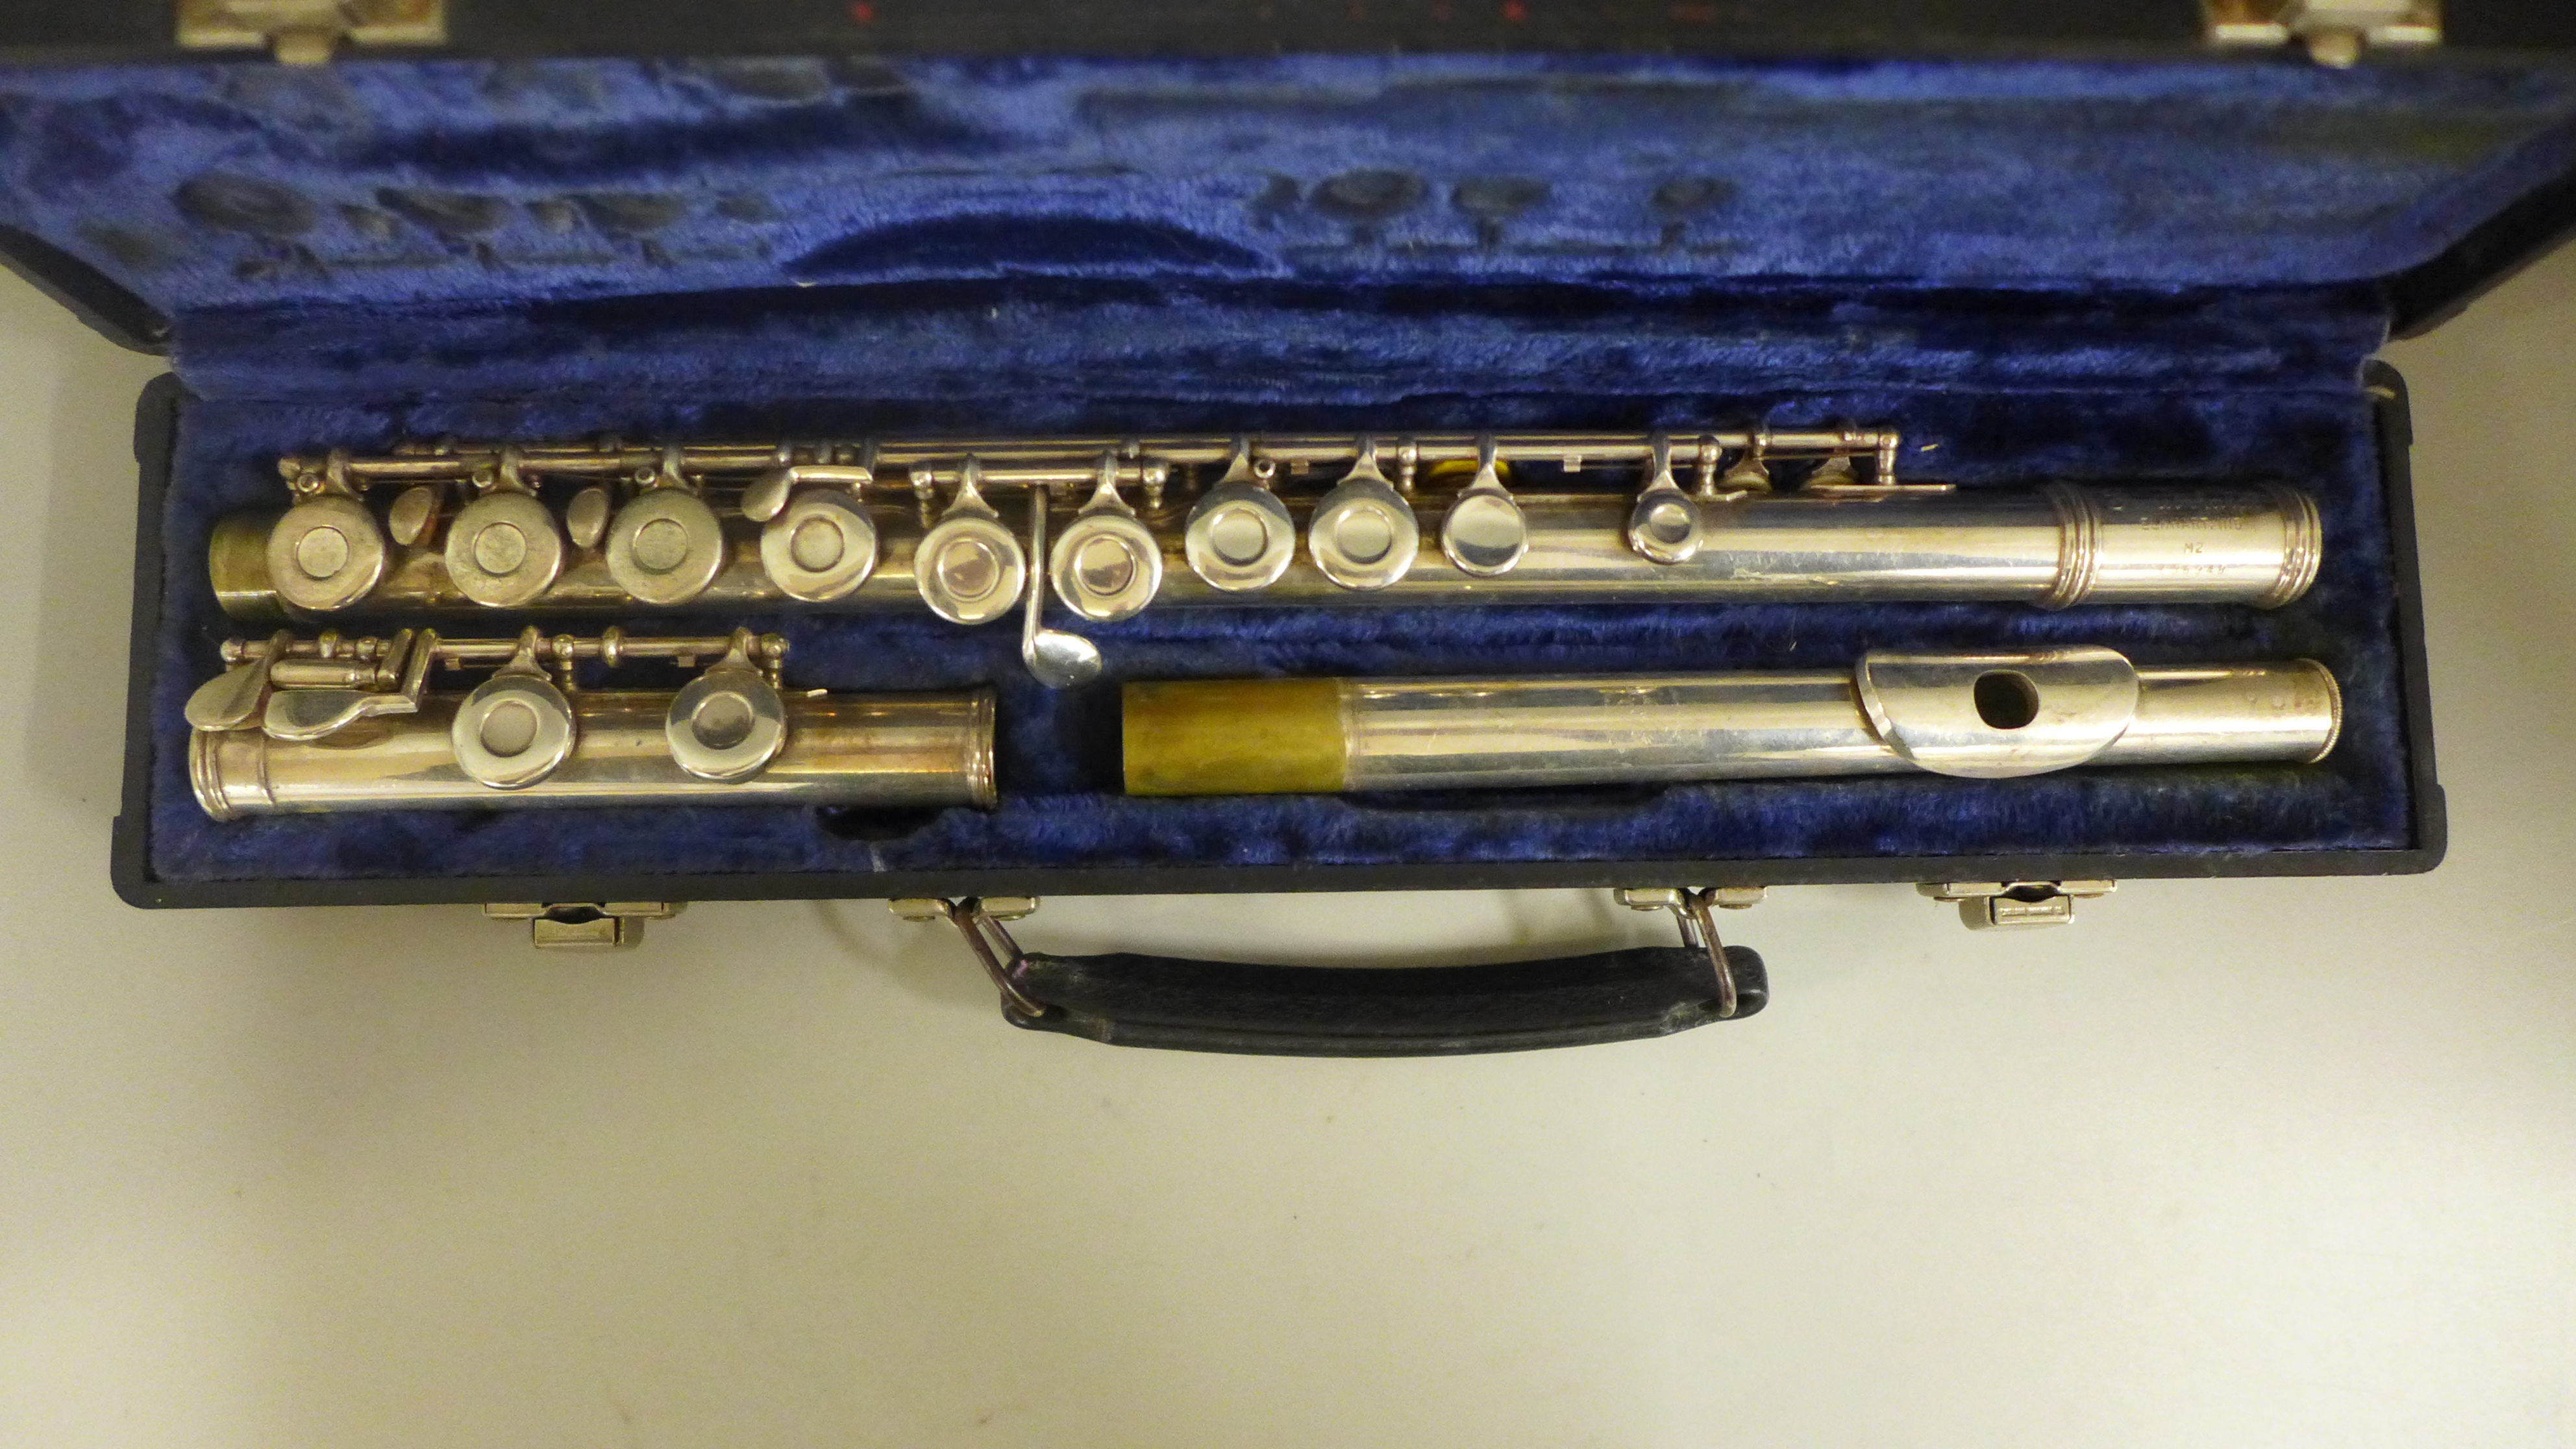 A silver plated flute, Gemeinhardt, cased - Image 2 of 3